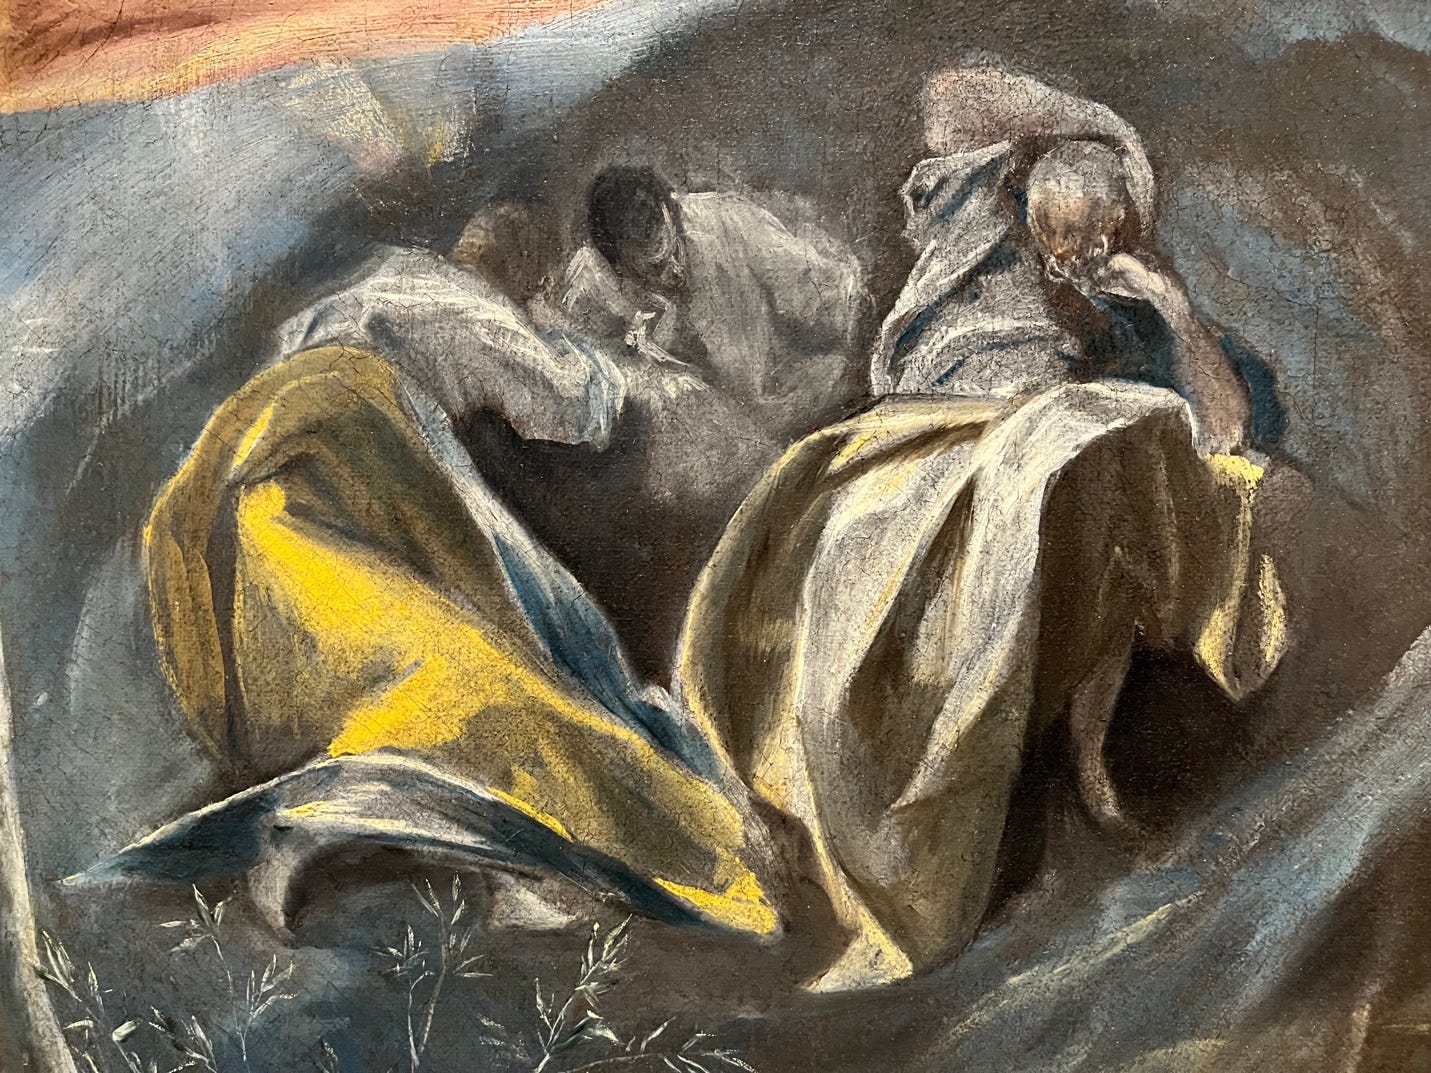 A painting of people in blankets

Description automatically generated with medium confidence